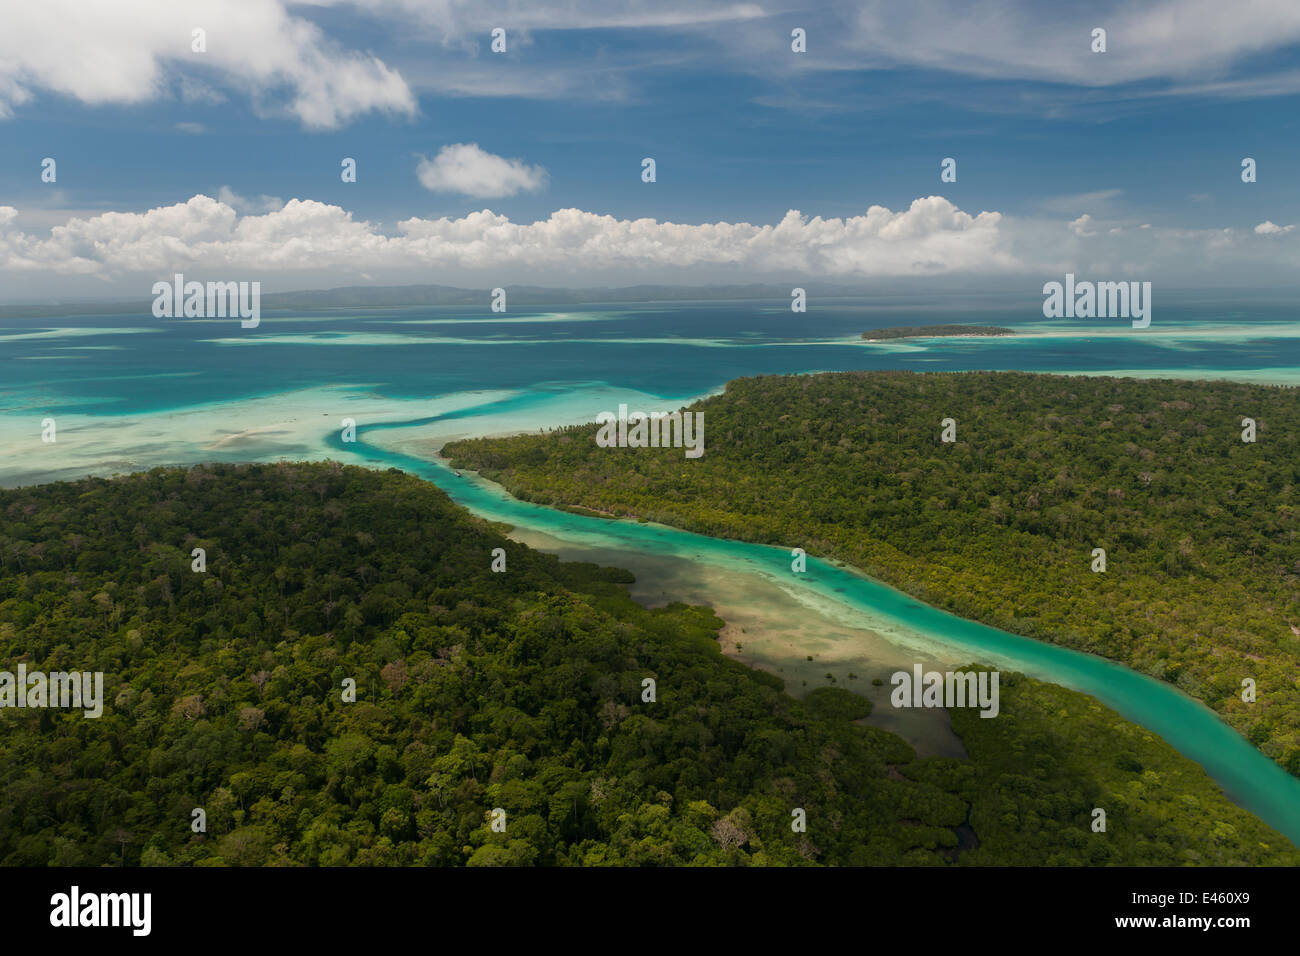 Aerial view of coral cays and white sand bars surrounding Bugsuk Island, Farm 1 of Jewelmer pearl farm. This private island has been highly protected since the 1970's and is in pristine environmental condition, Palawan, Philippines, April 2010, cultured G Stock Photo